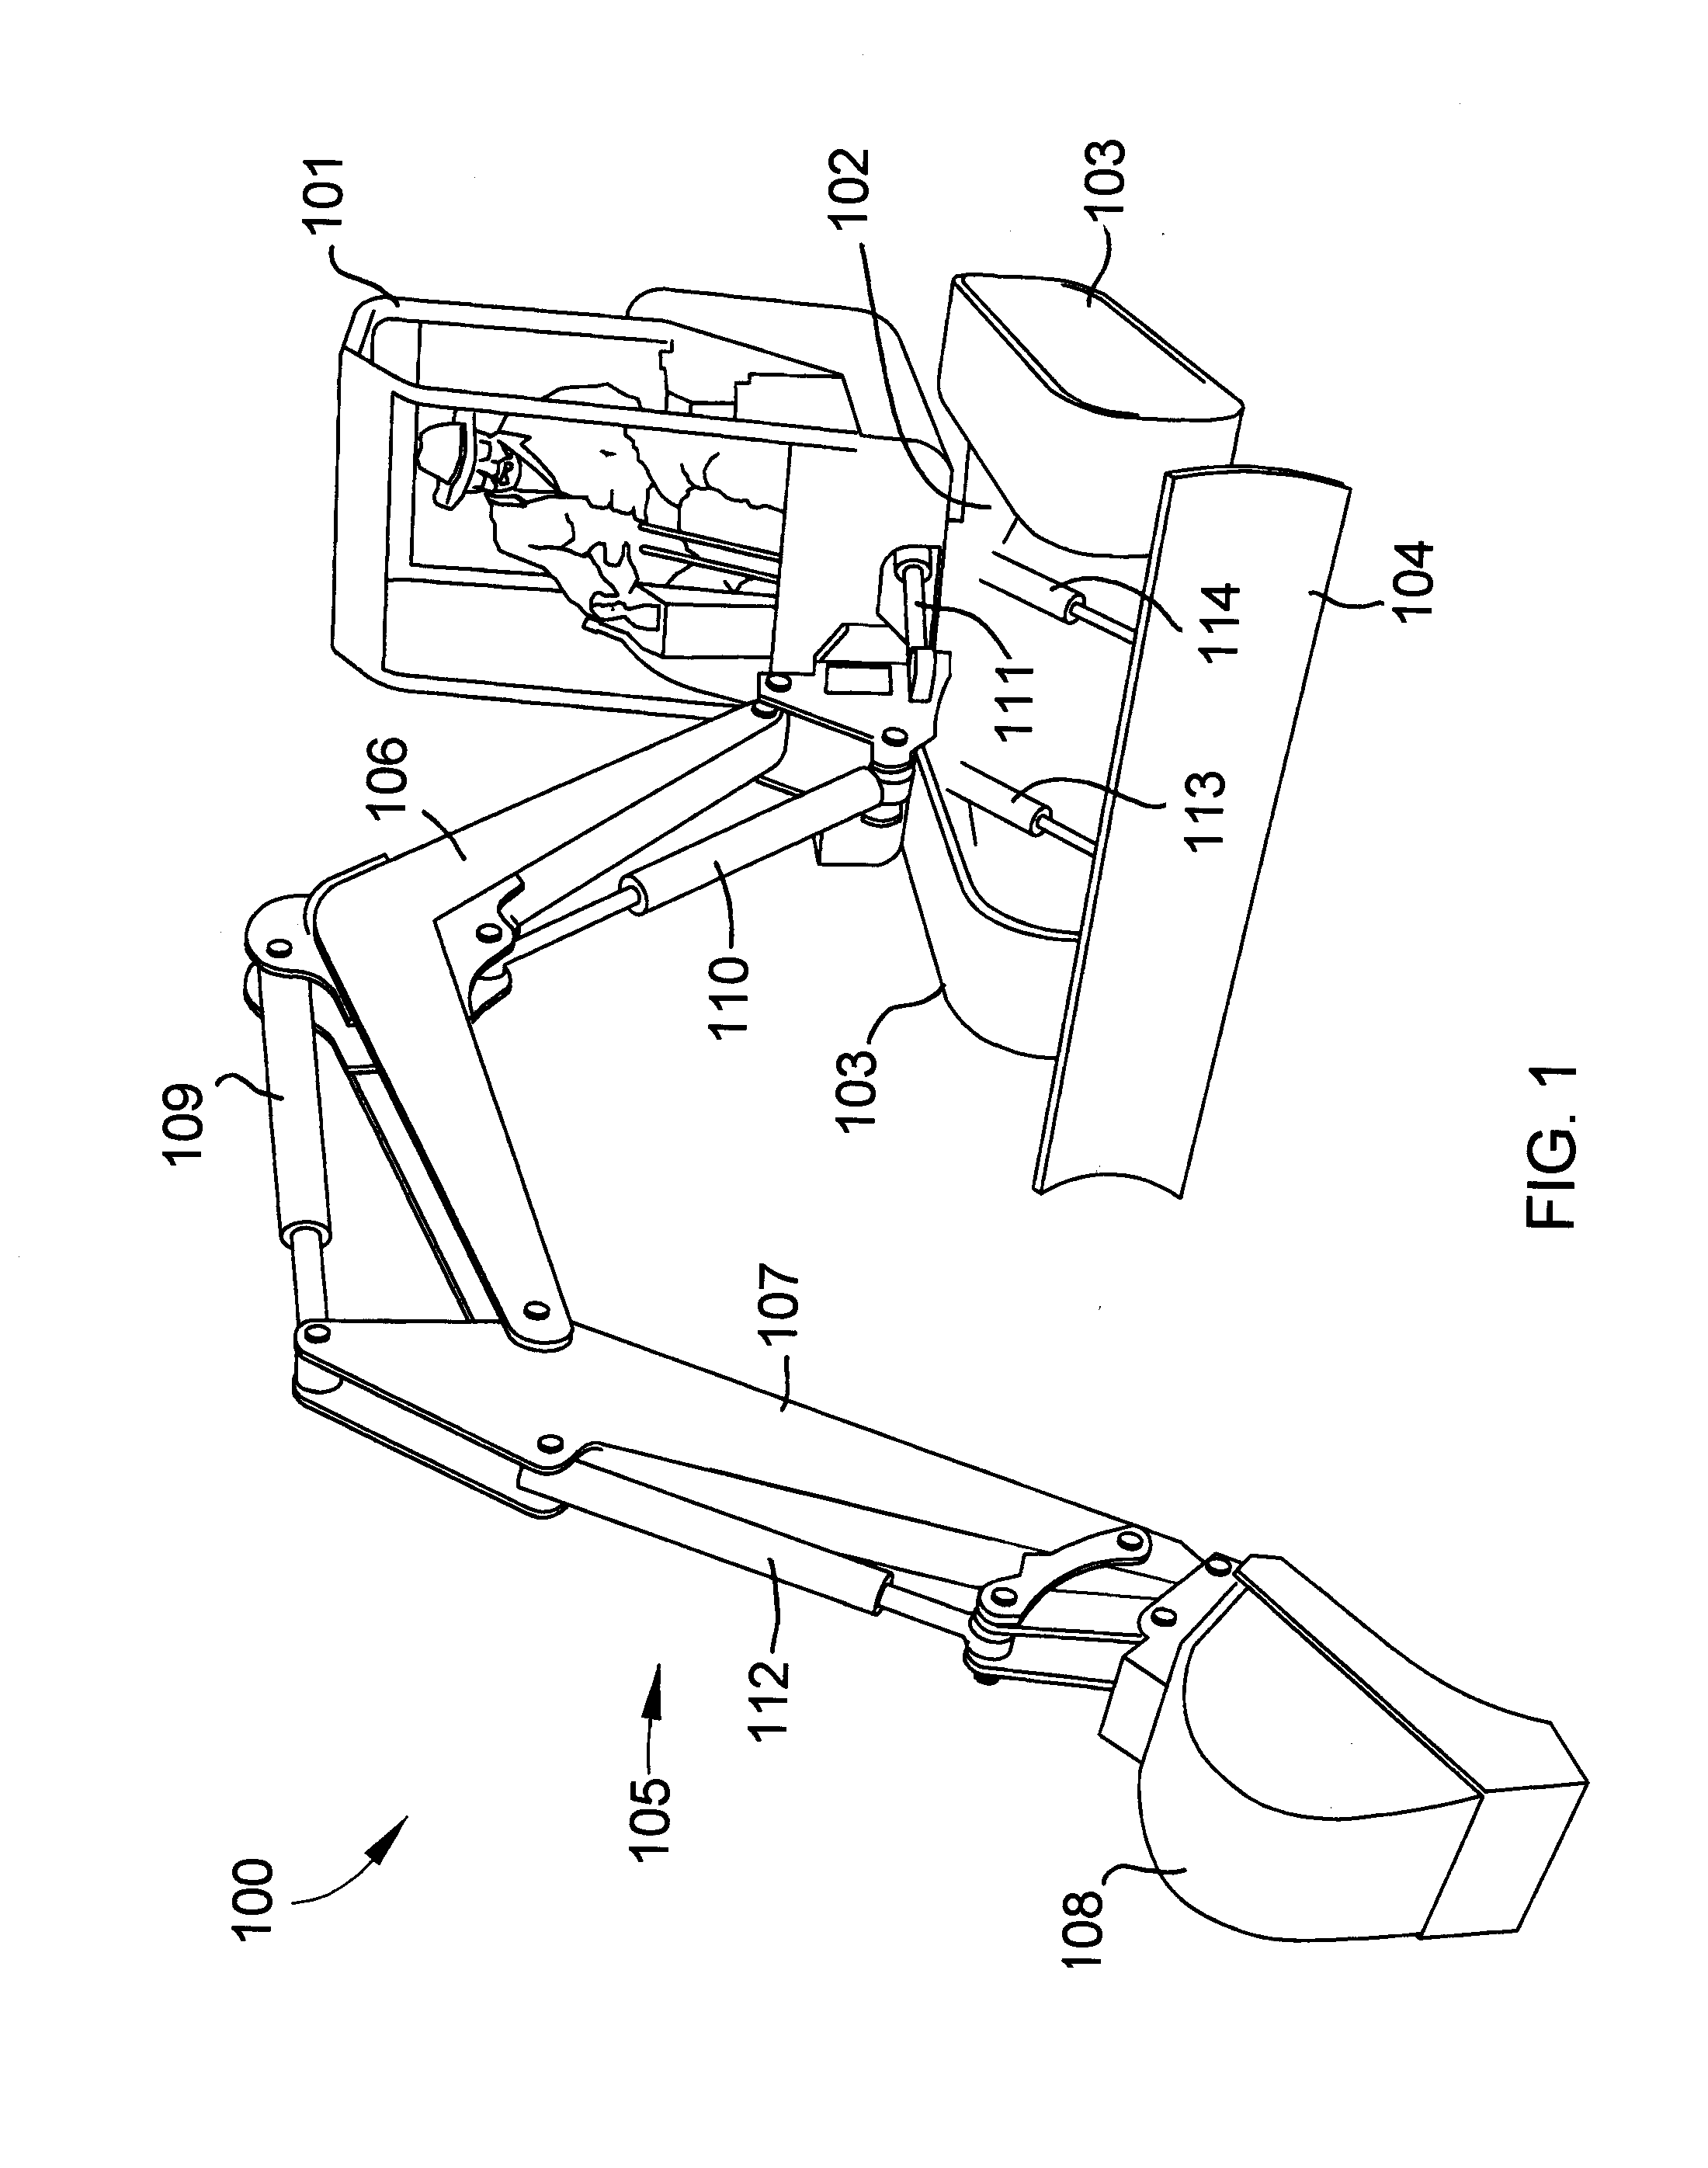 Multi-function machines, hydraulic systems therefor, and methods for their operation